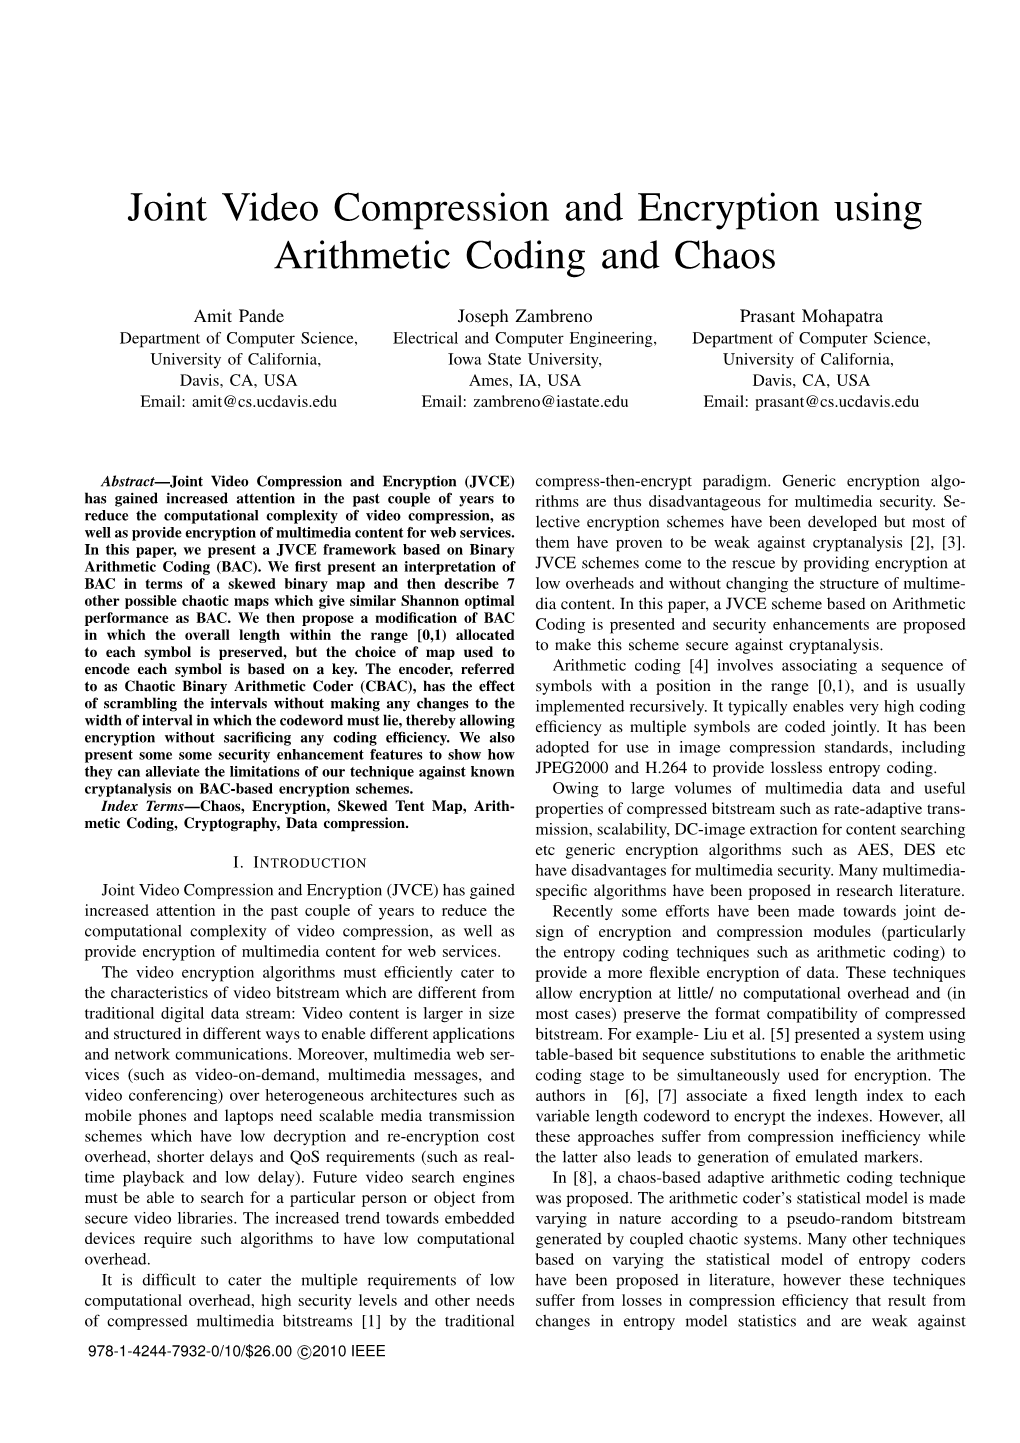 Joint Video Compression and Encryption Using Arithmetic Coding and Chaos